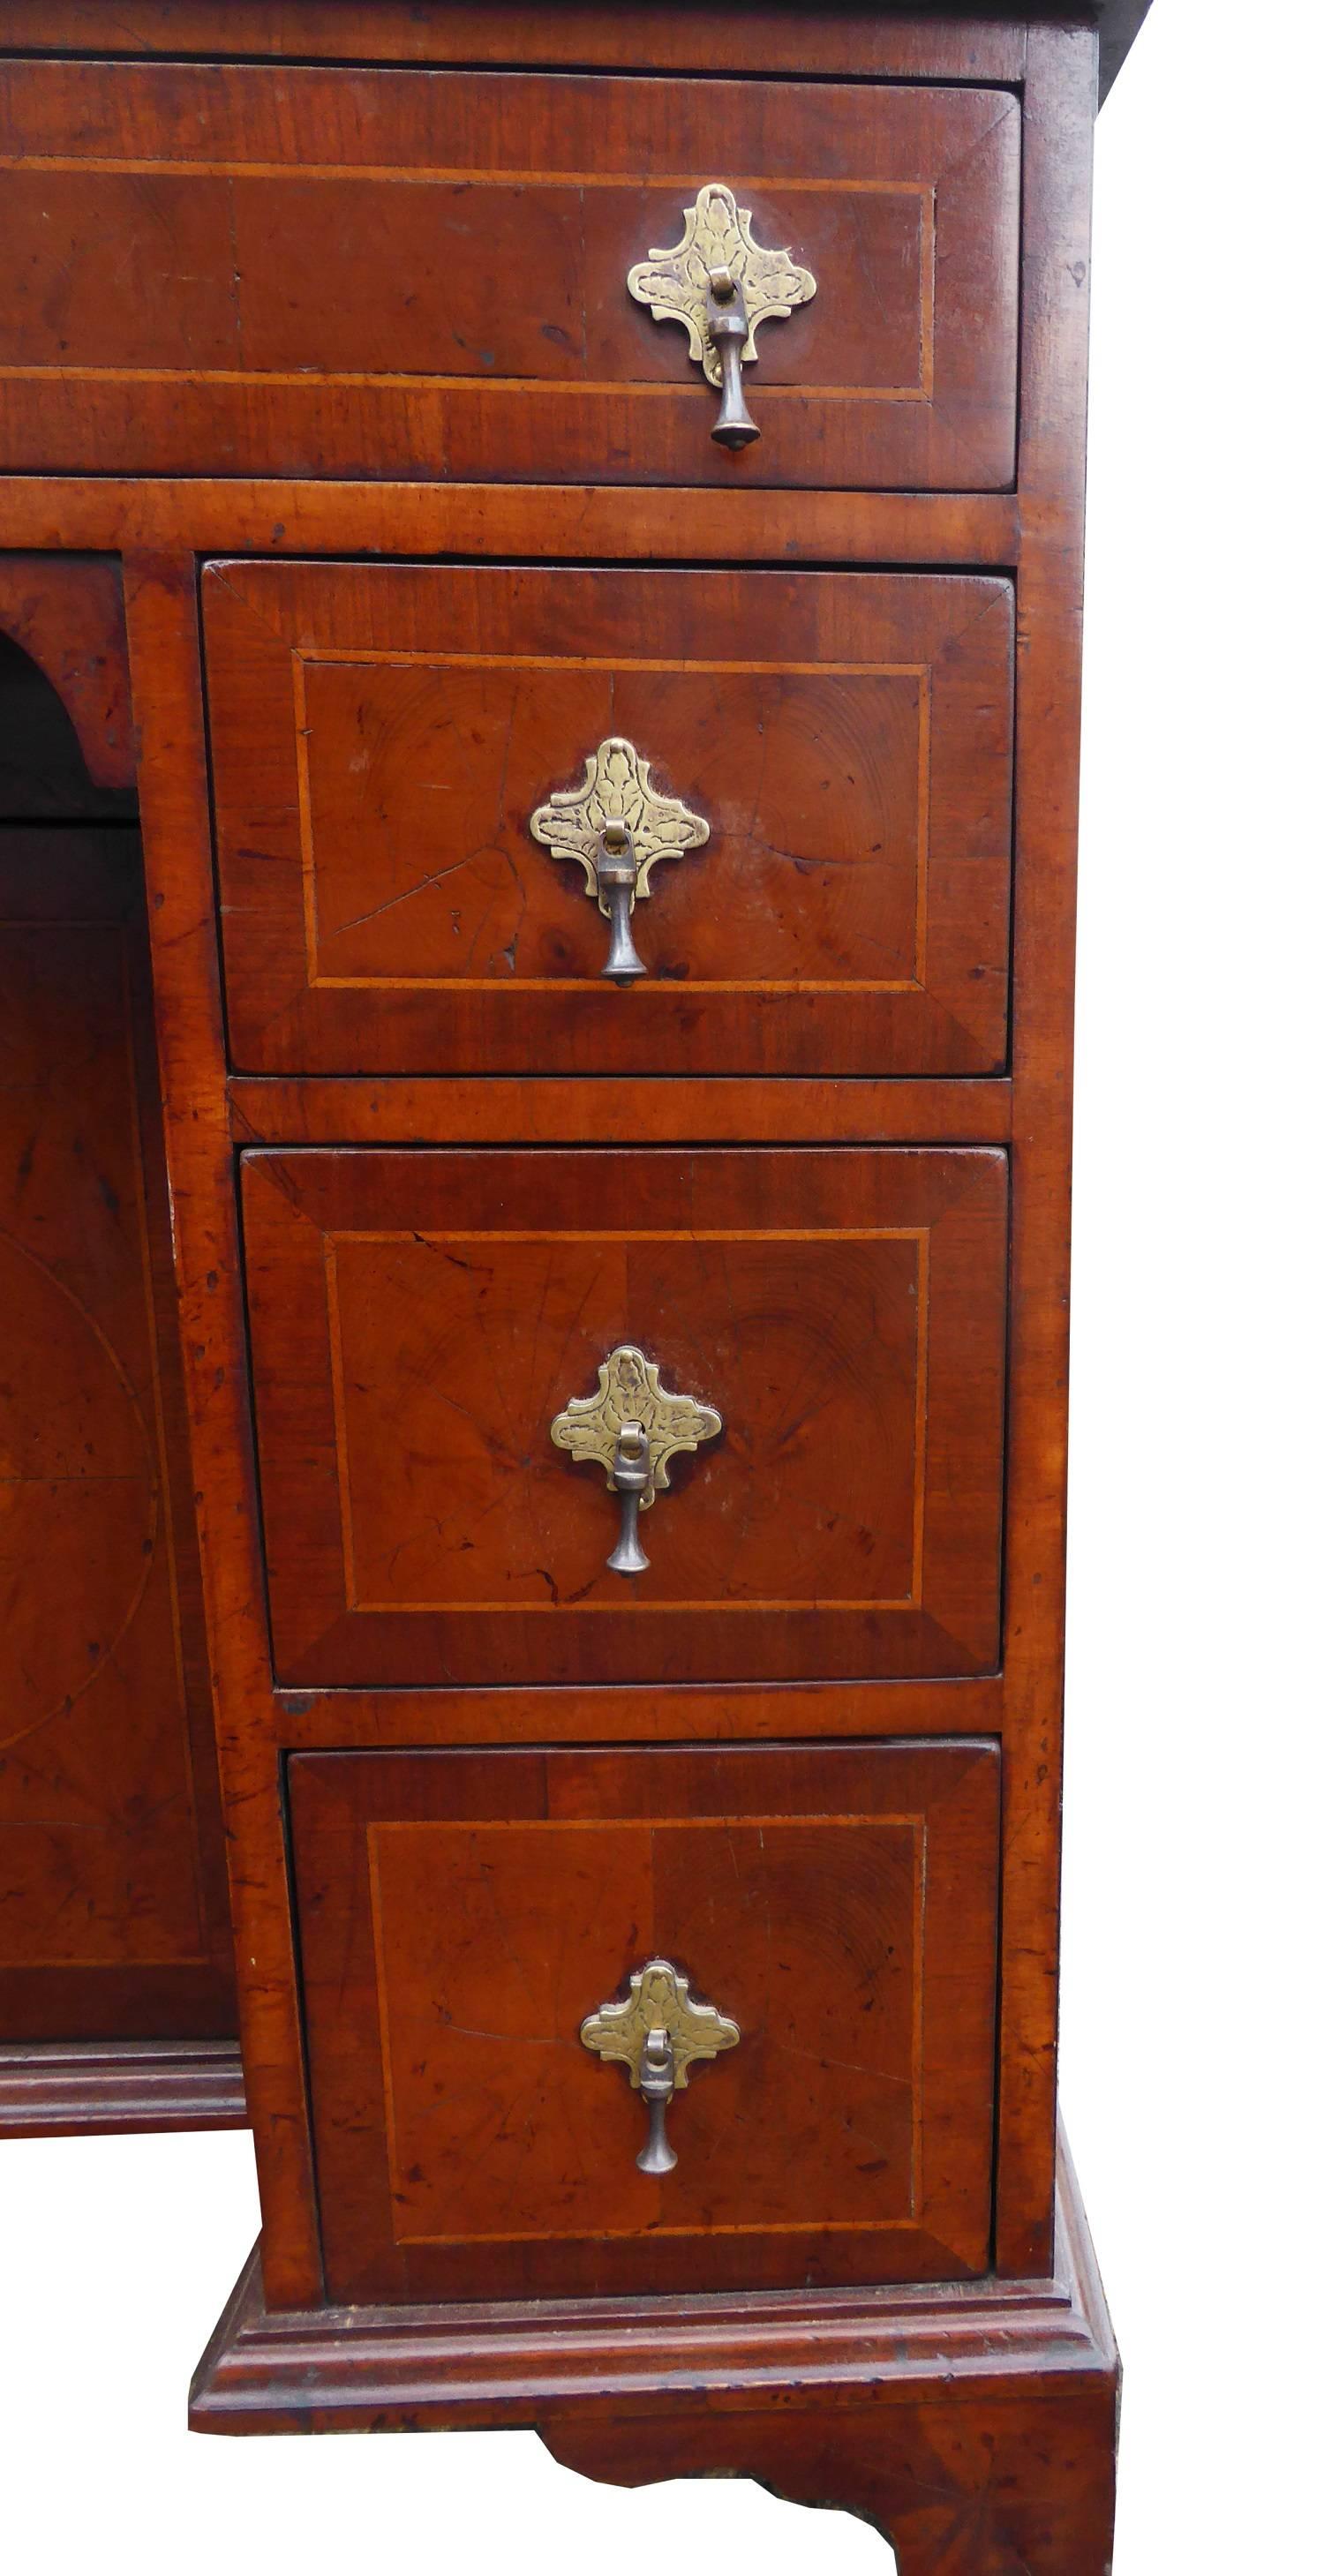 20th Century Queen Anne Style Keehole Desk For Sale